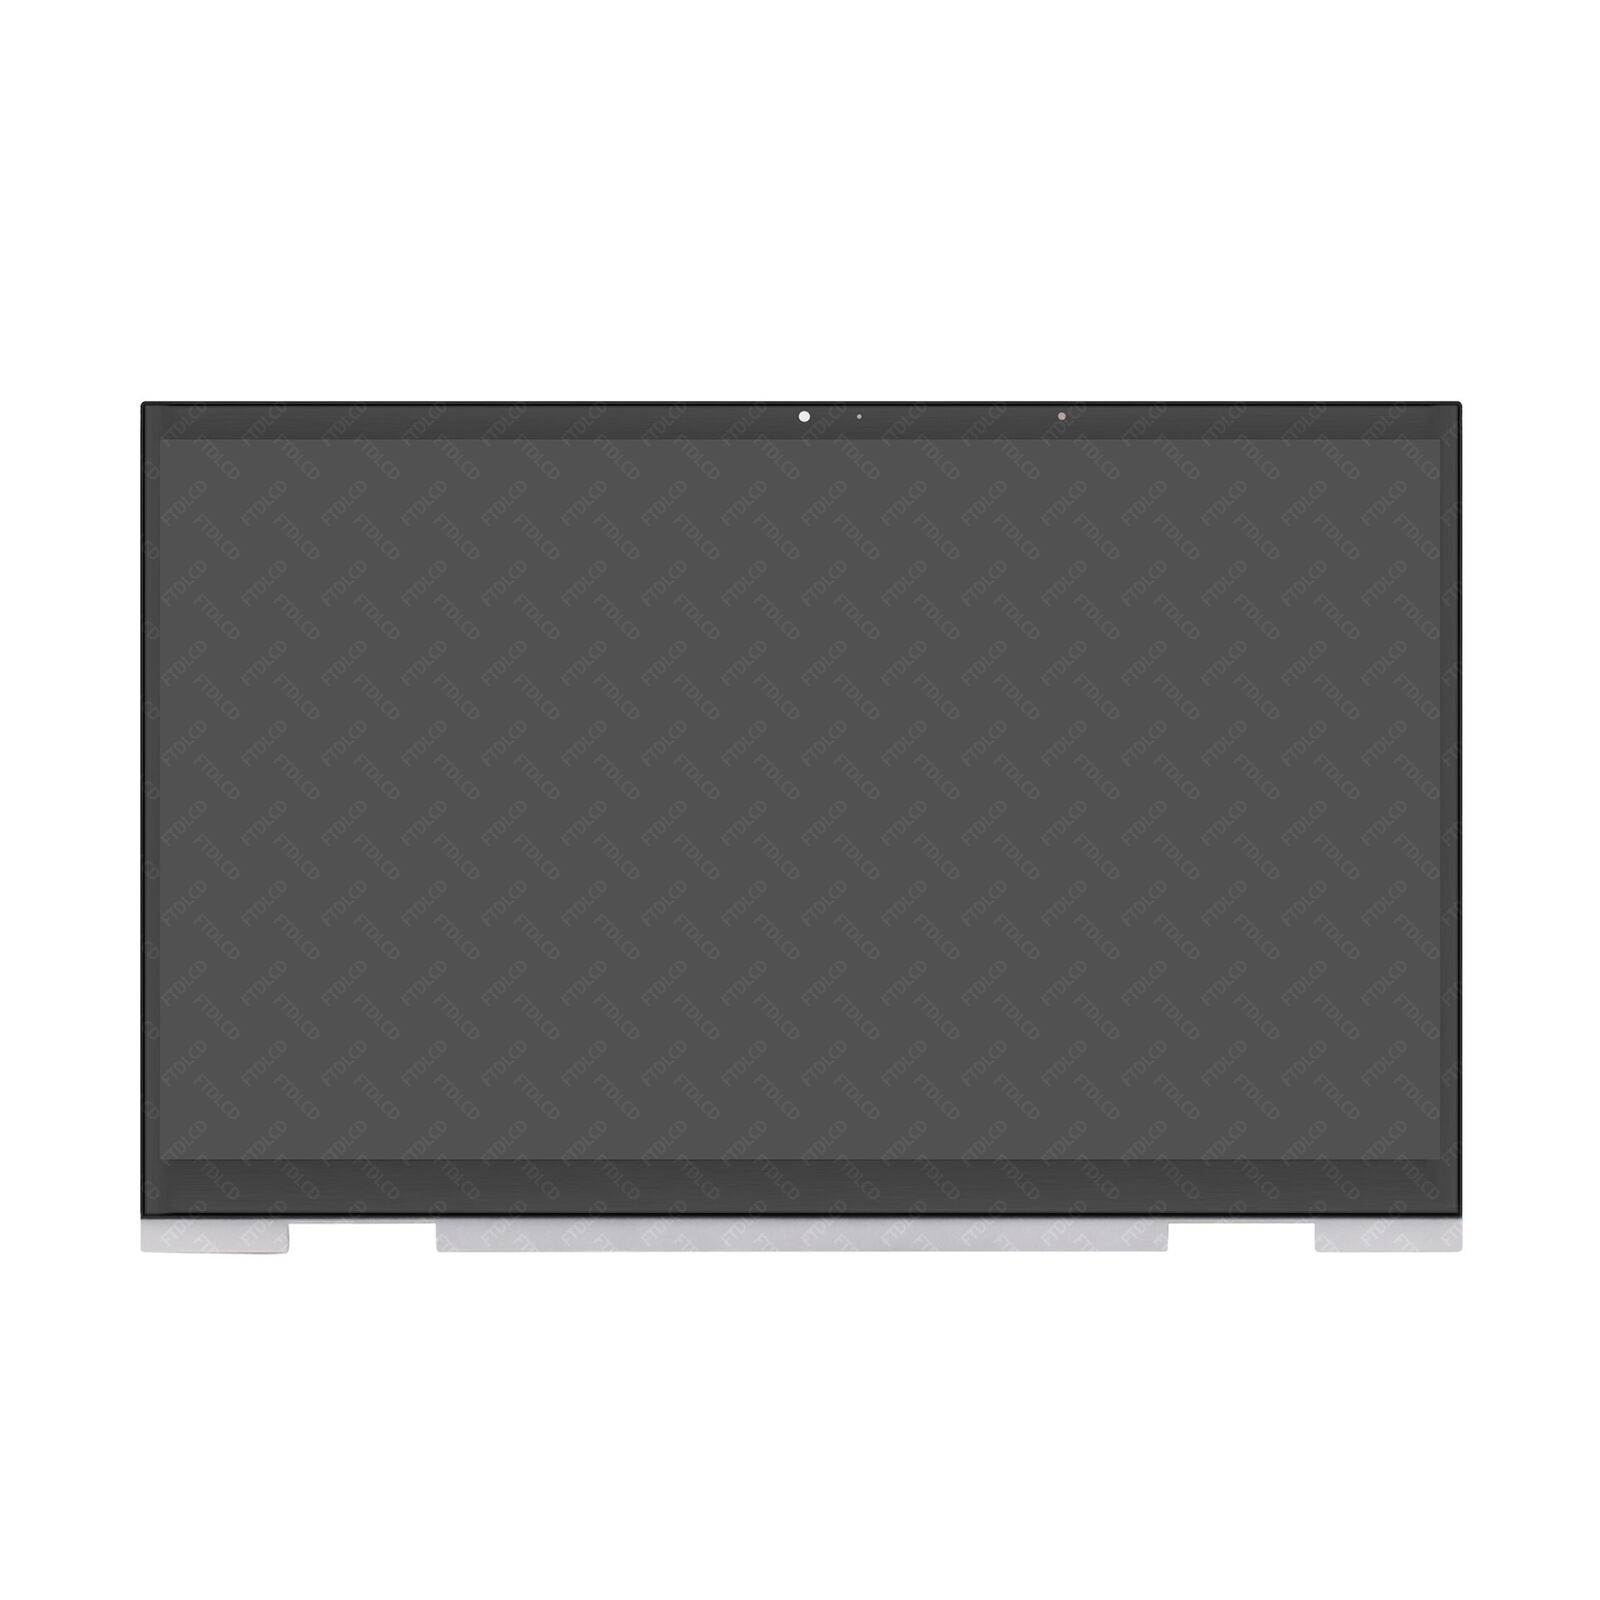 M45453-001 FHD LCD Touch Screen Digitizer Assembly for HP ENVY X360 15m-ES1023DX